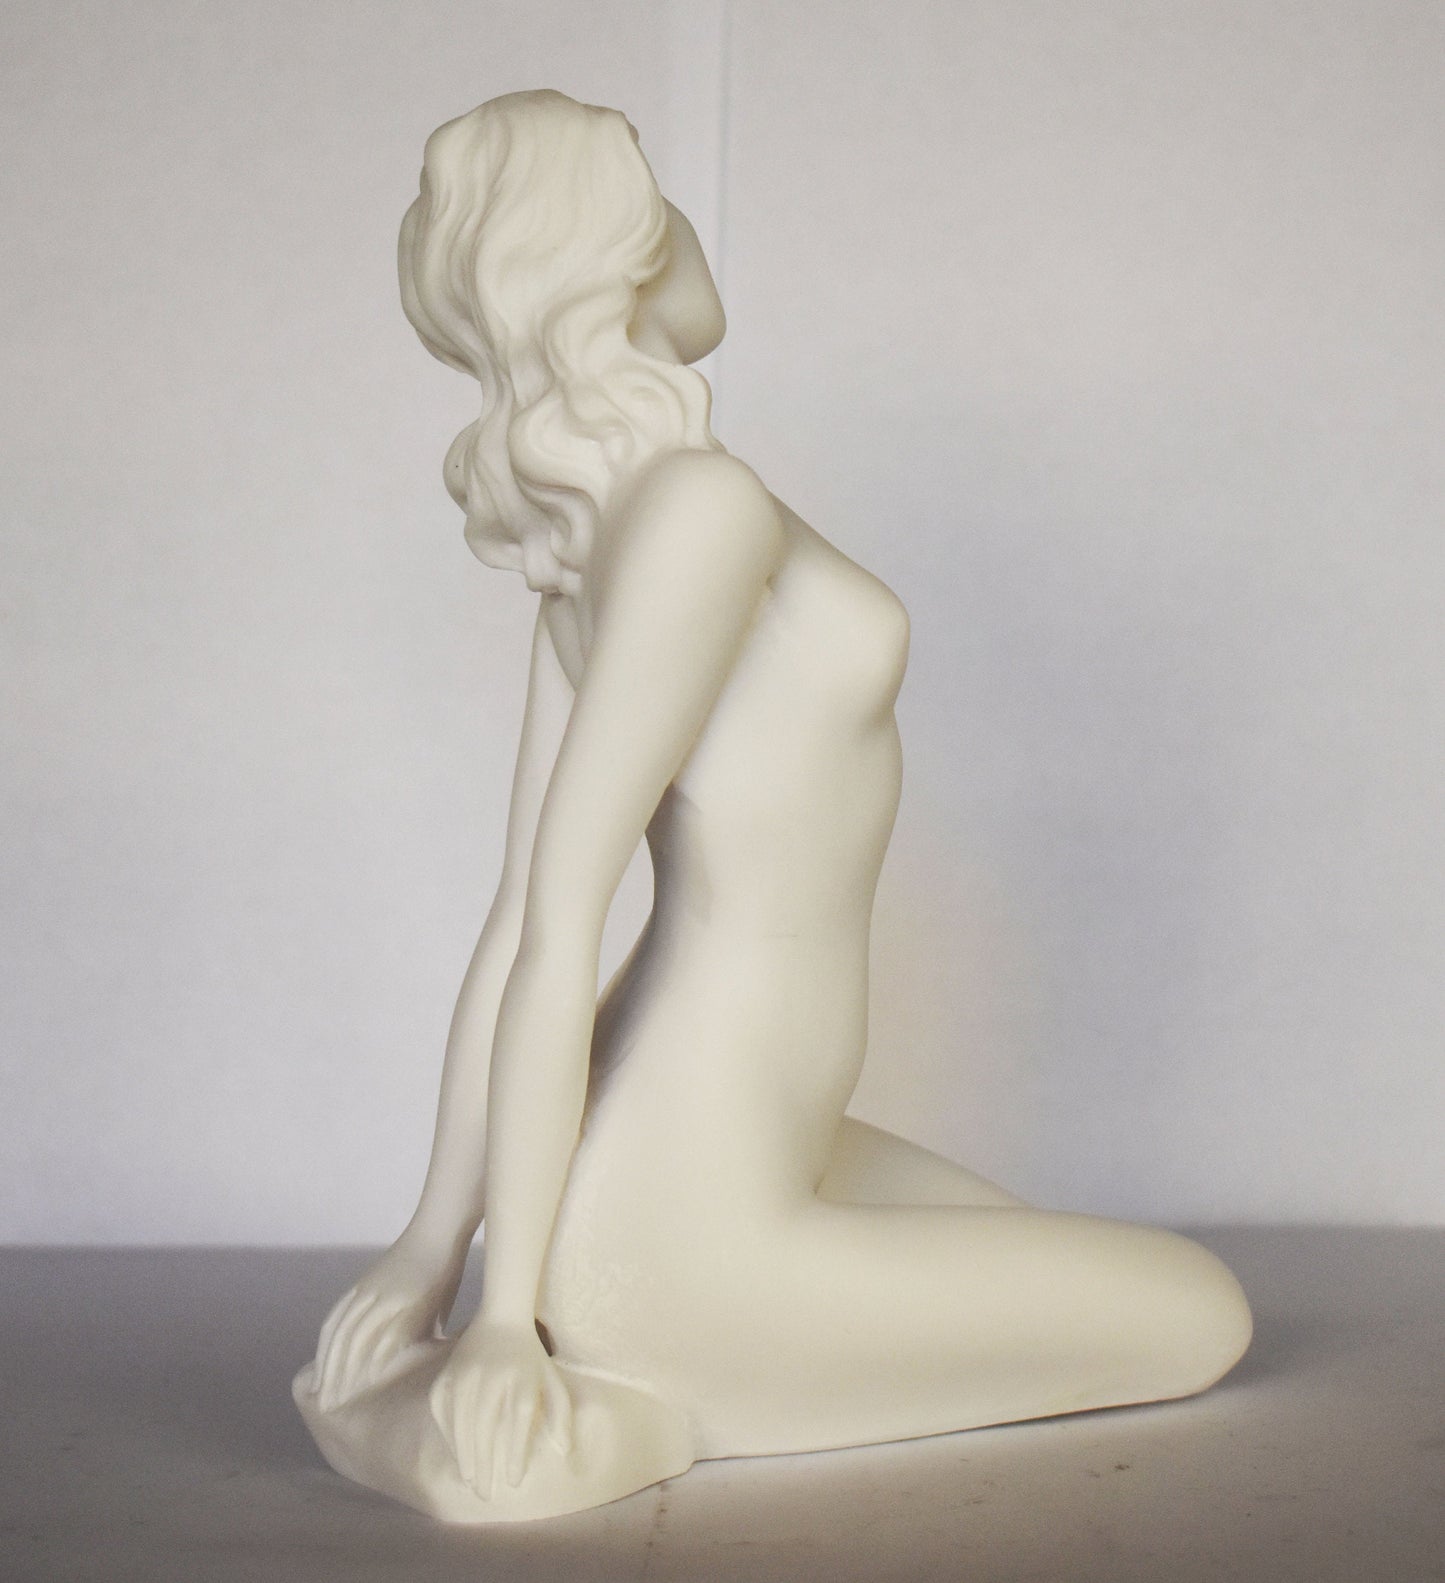 Naked Female Statue - Erotic Art - Sexy Pose - Beautiful Woman - Hot Body - Desire and Love - Alabaster Sculpture -